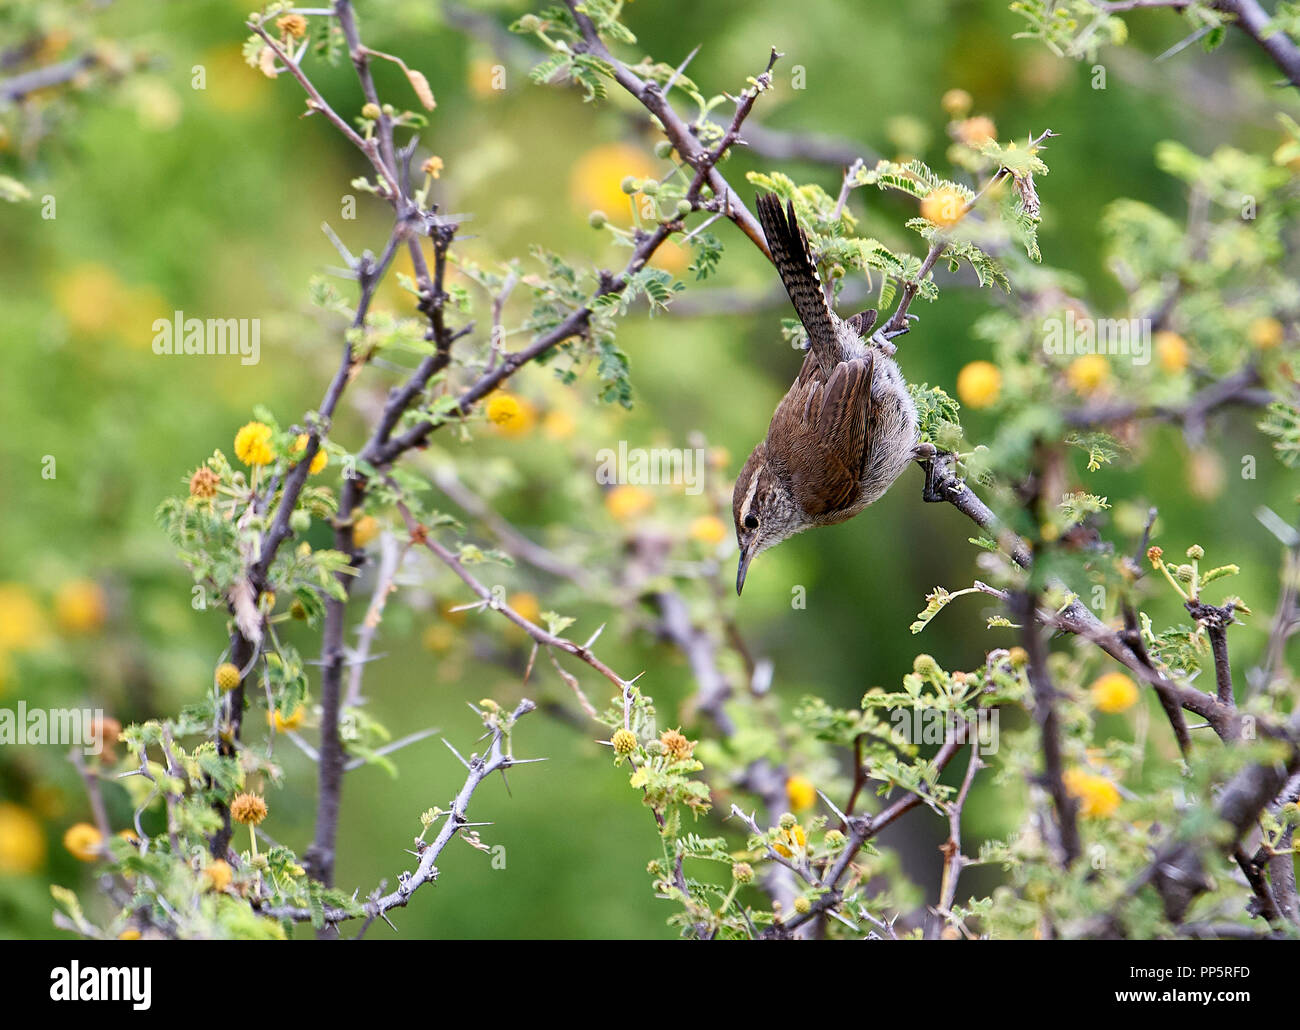 Bewick's Wren (Thryomanes bewickii) searching for insects in a tree, San Juan Cosala, Jalisco, Mexico Stock Photo